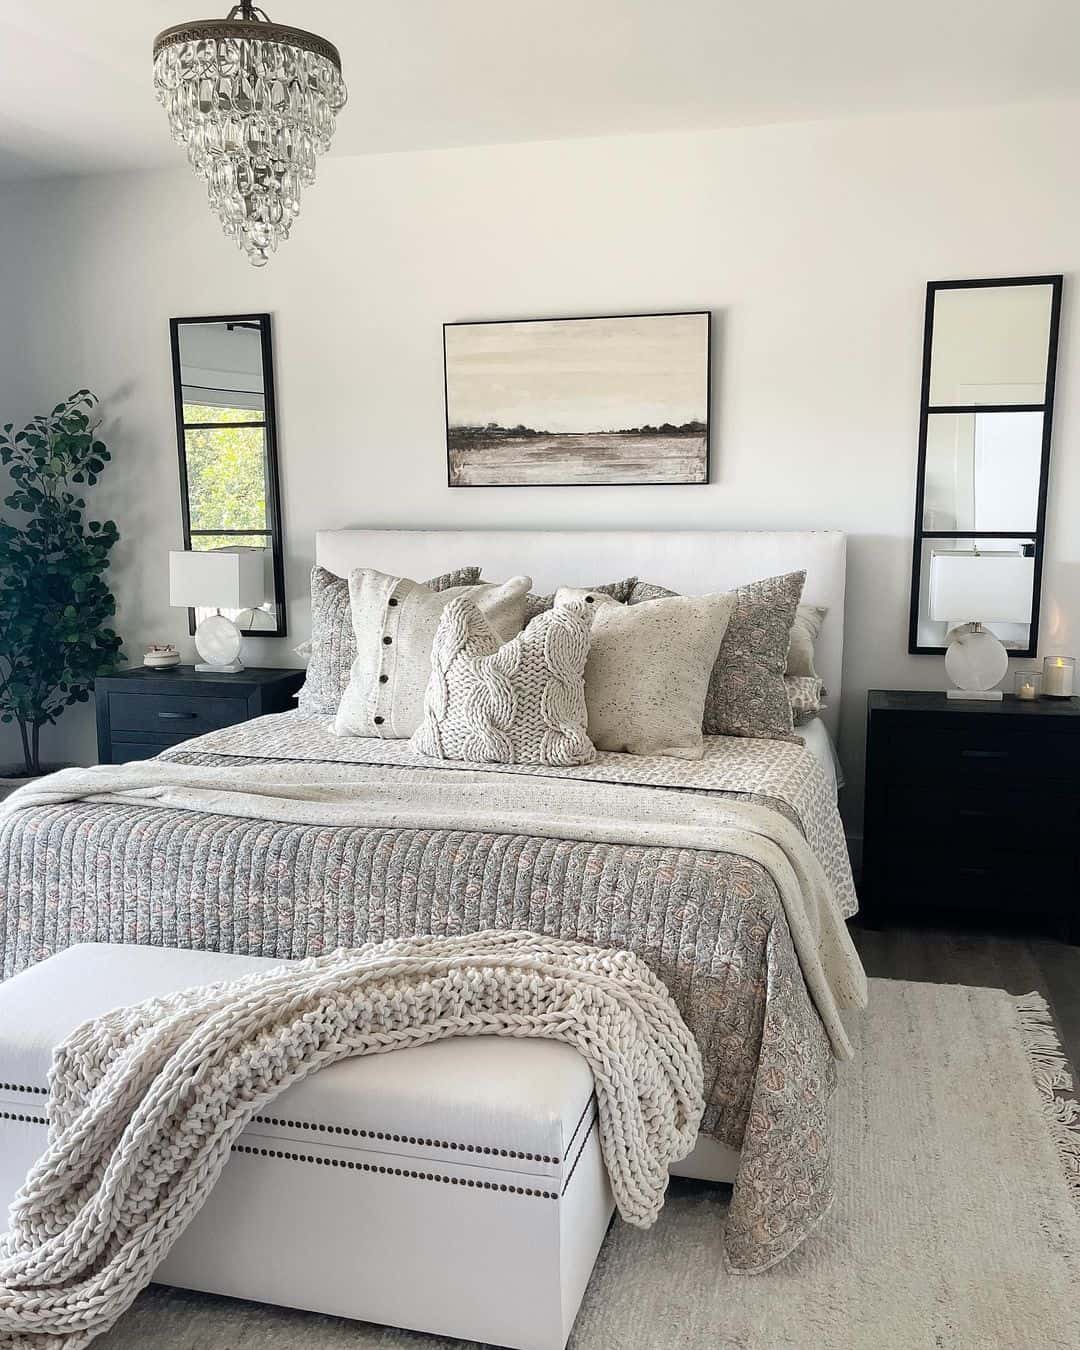 Chic White and Black Bedroom Featuring a Gray Floral Bedspread